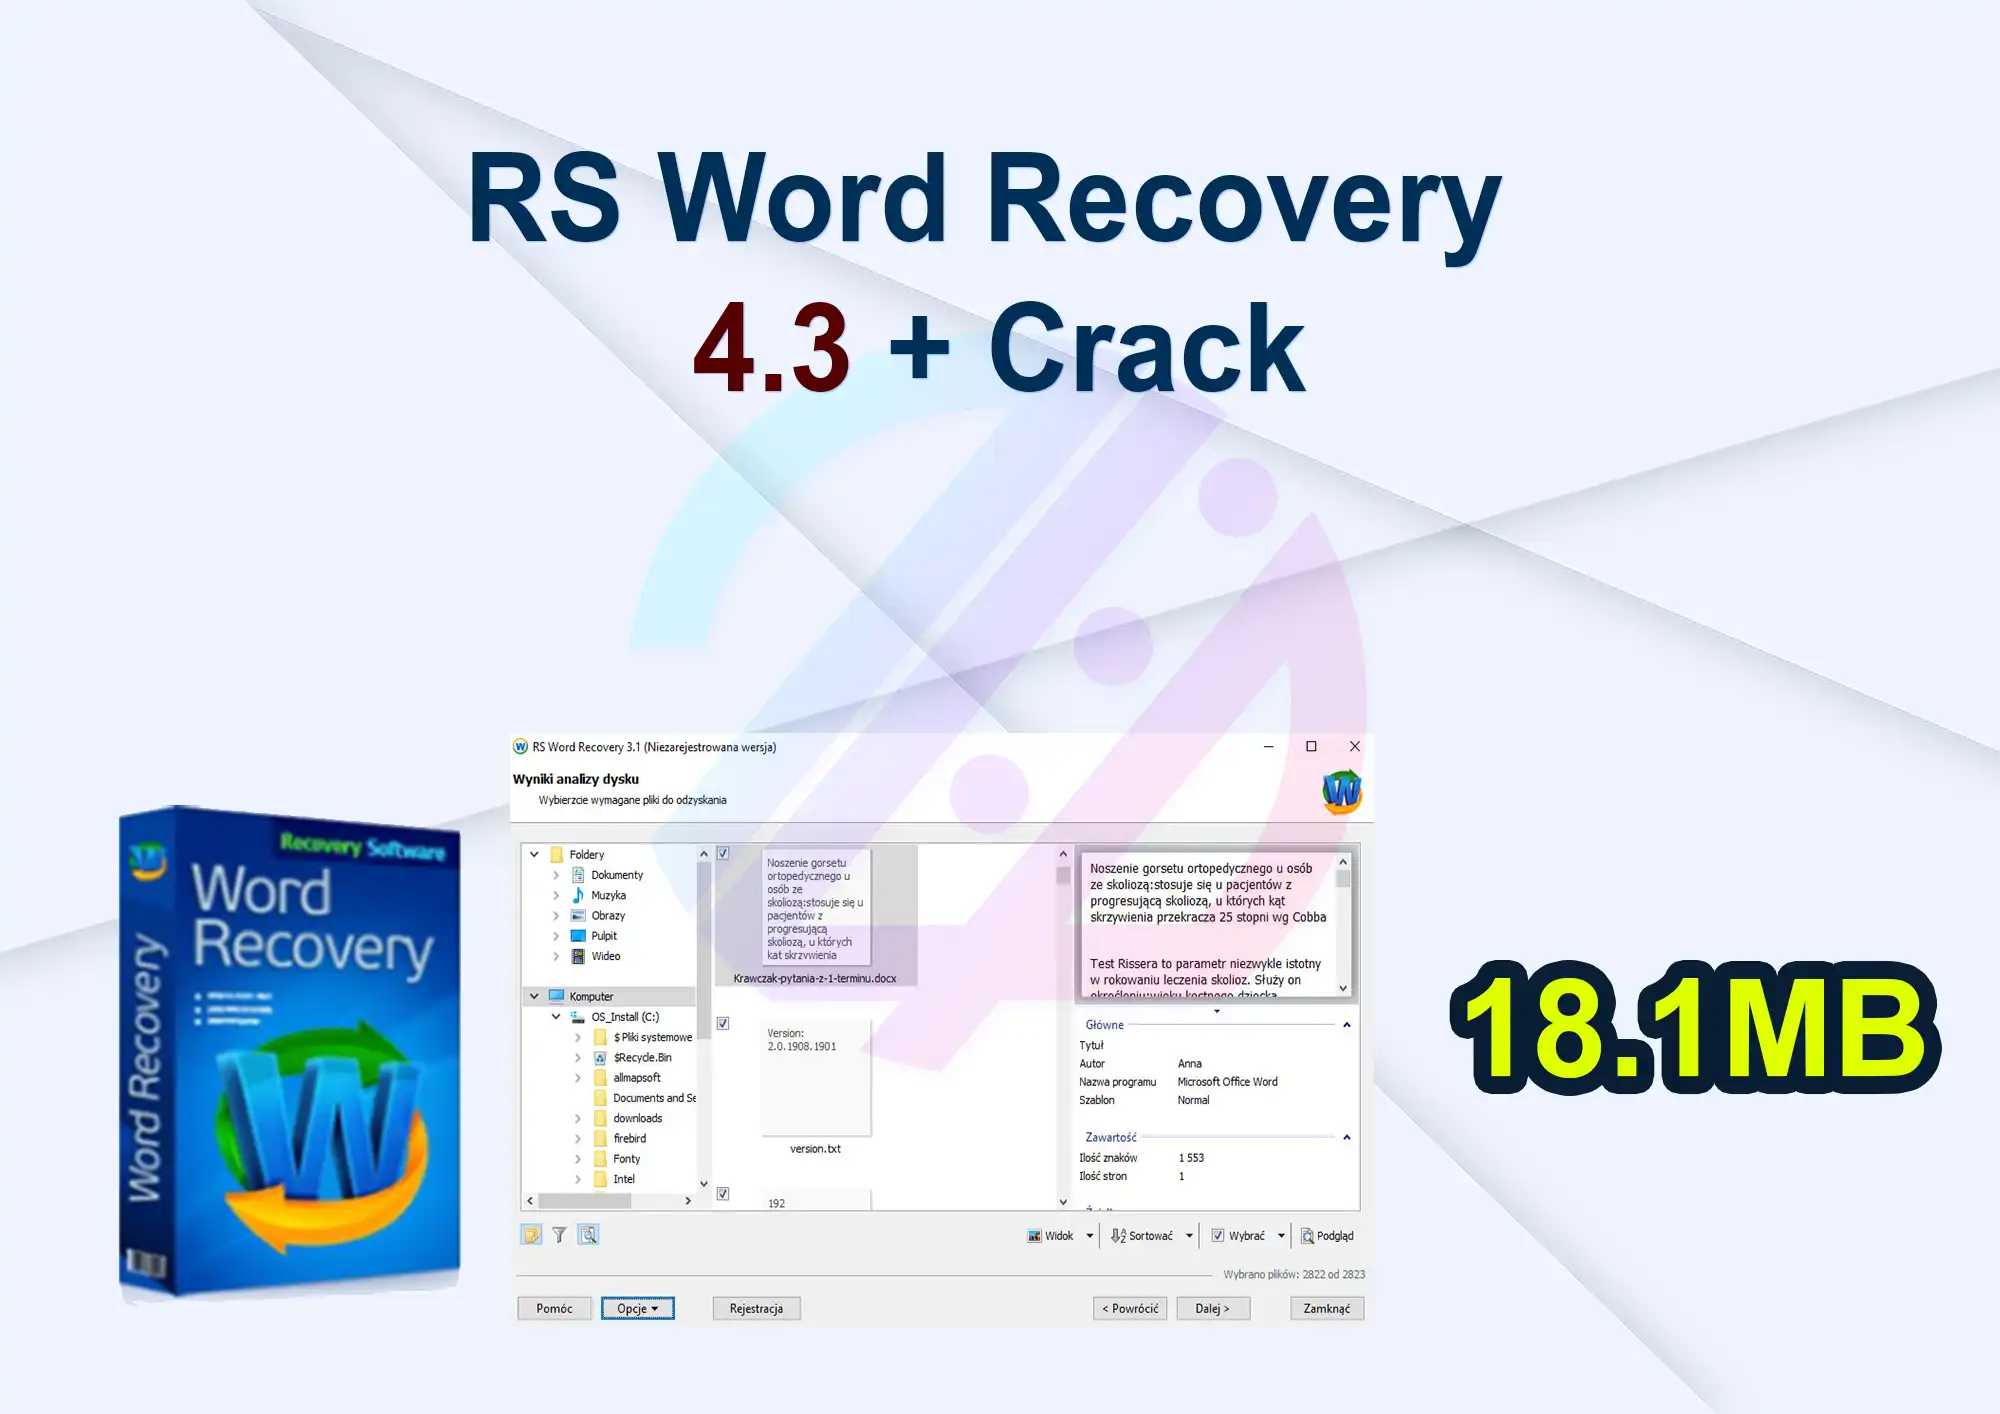 RS Word Recovery 4.3 + Crack